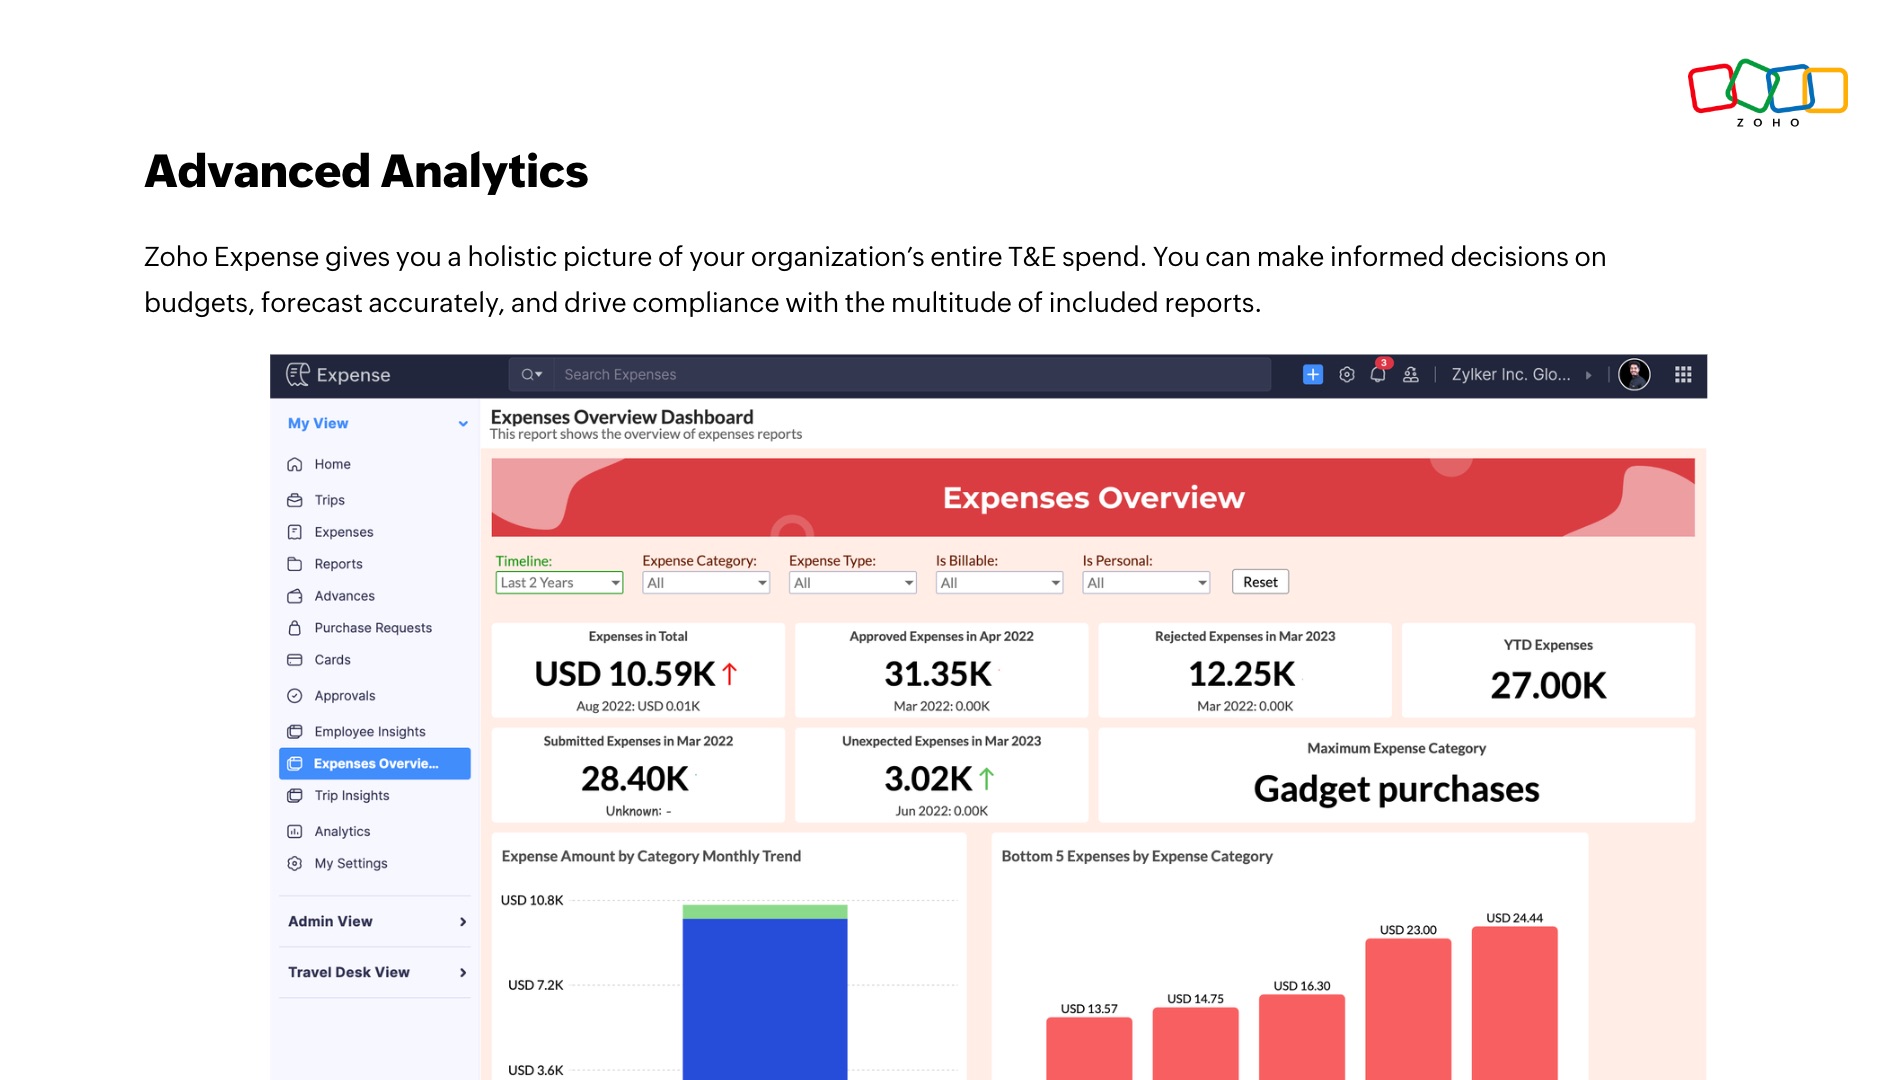 Run 30+ reports to analyze every aspect of business travel and spend